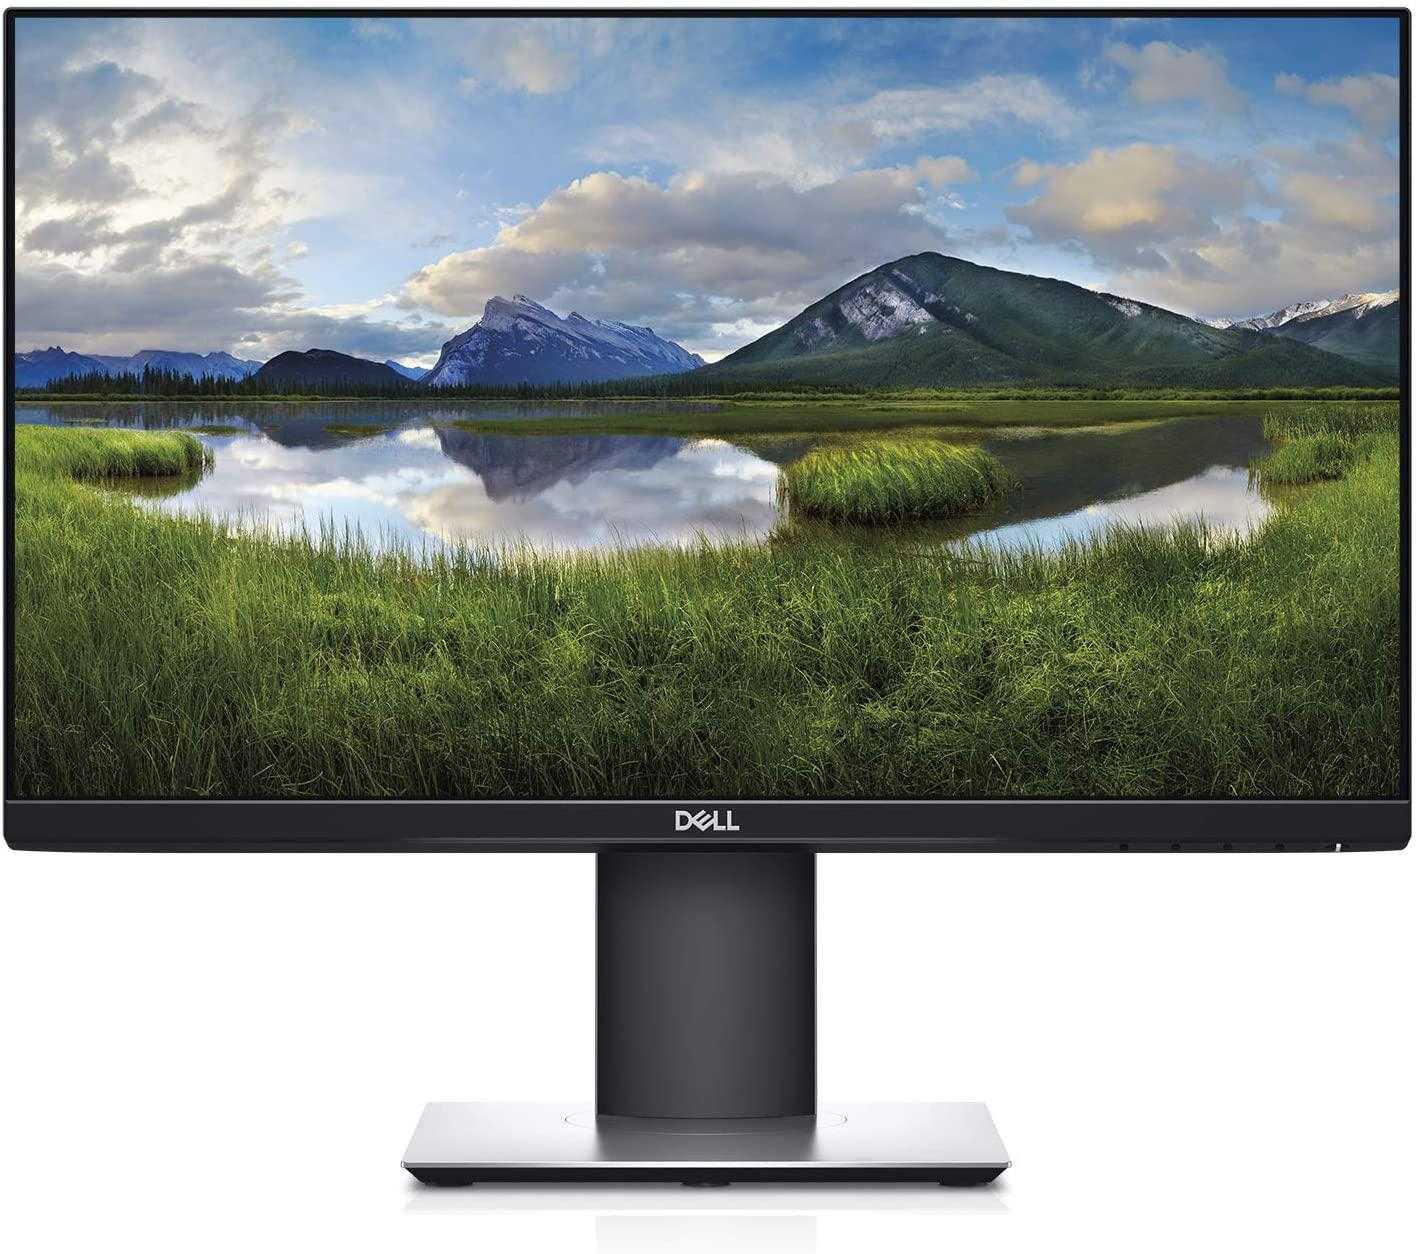 DELL, Dell P Series 27" Screen Full Hd Led-Lit Monitor (P2719H)